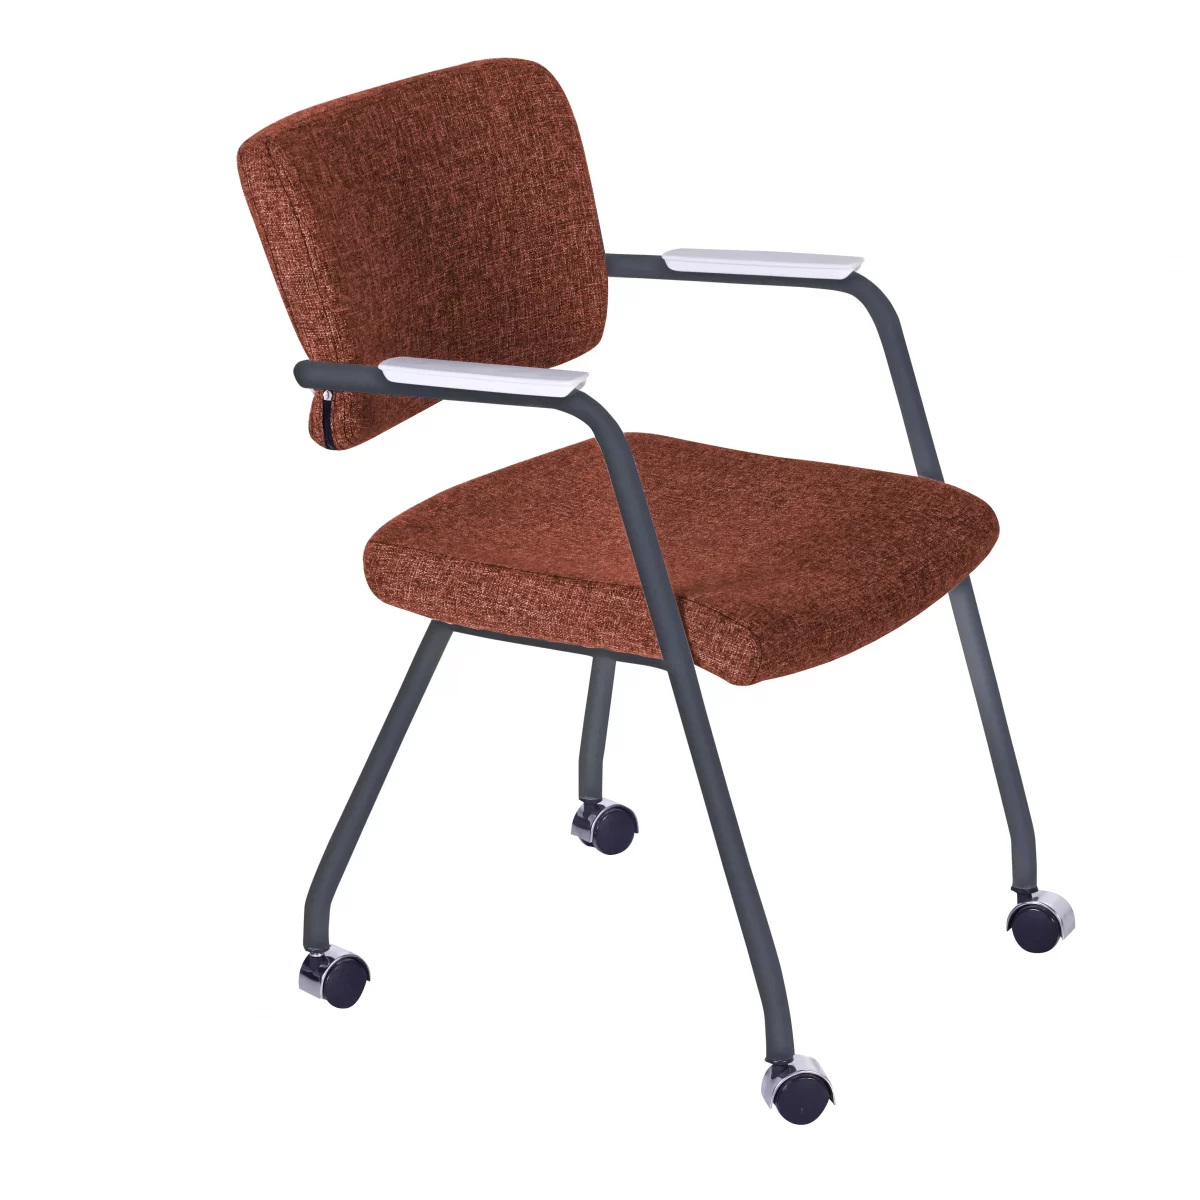 Zephra Office Meeting Chair scaled